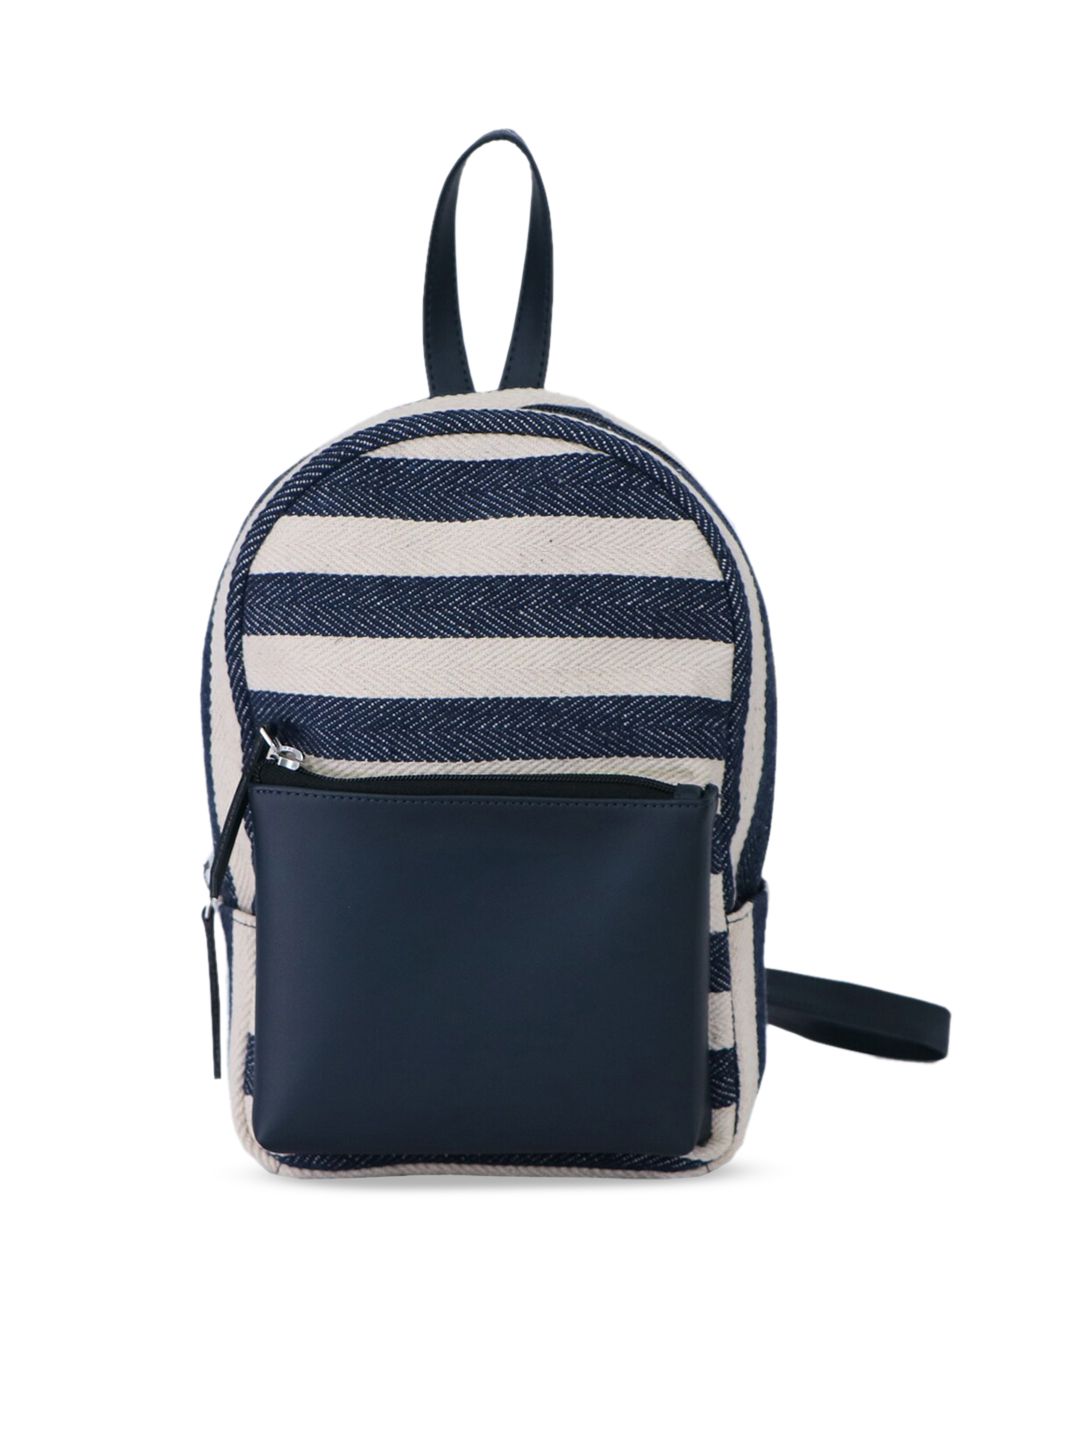 Diwaah Women Off-White & Navy Blue Striped Backpack Price in India